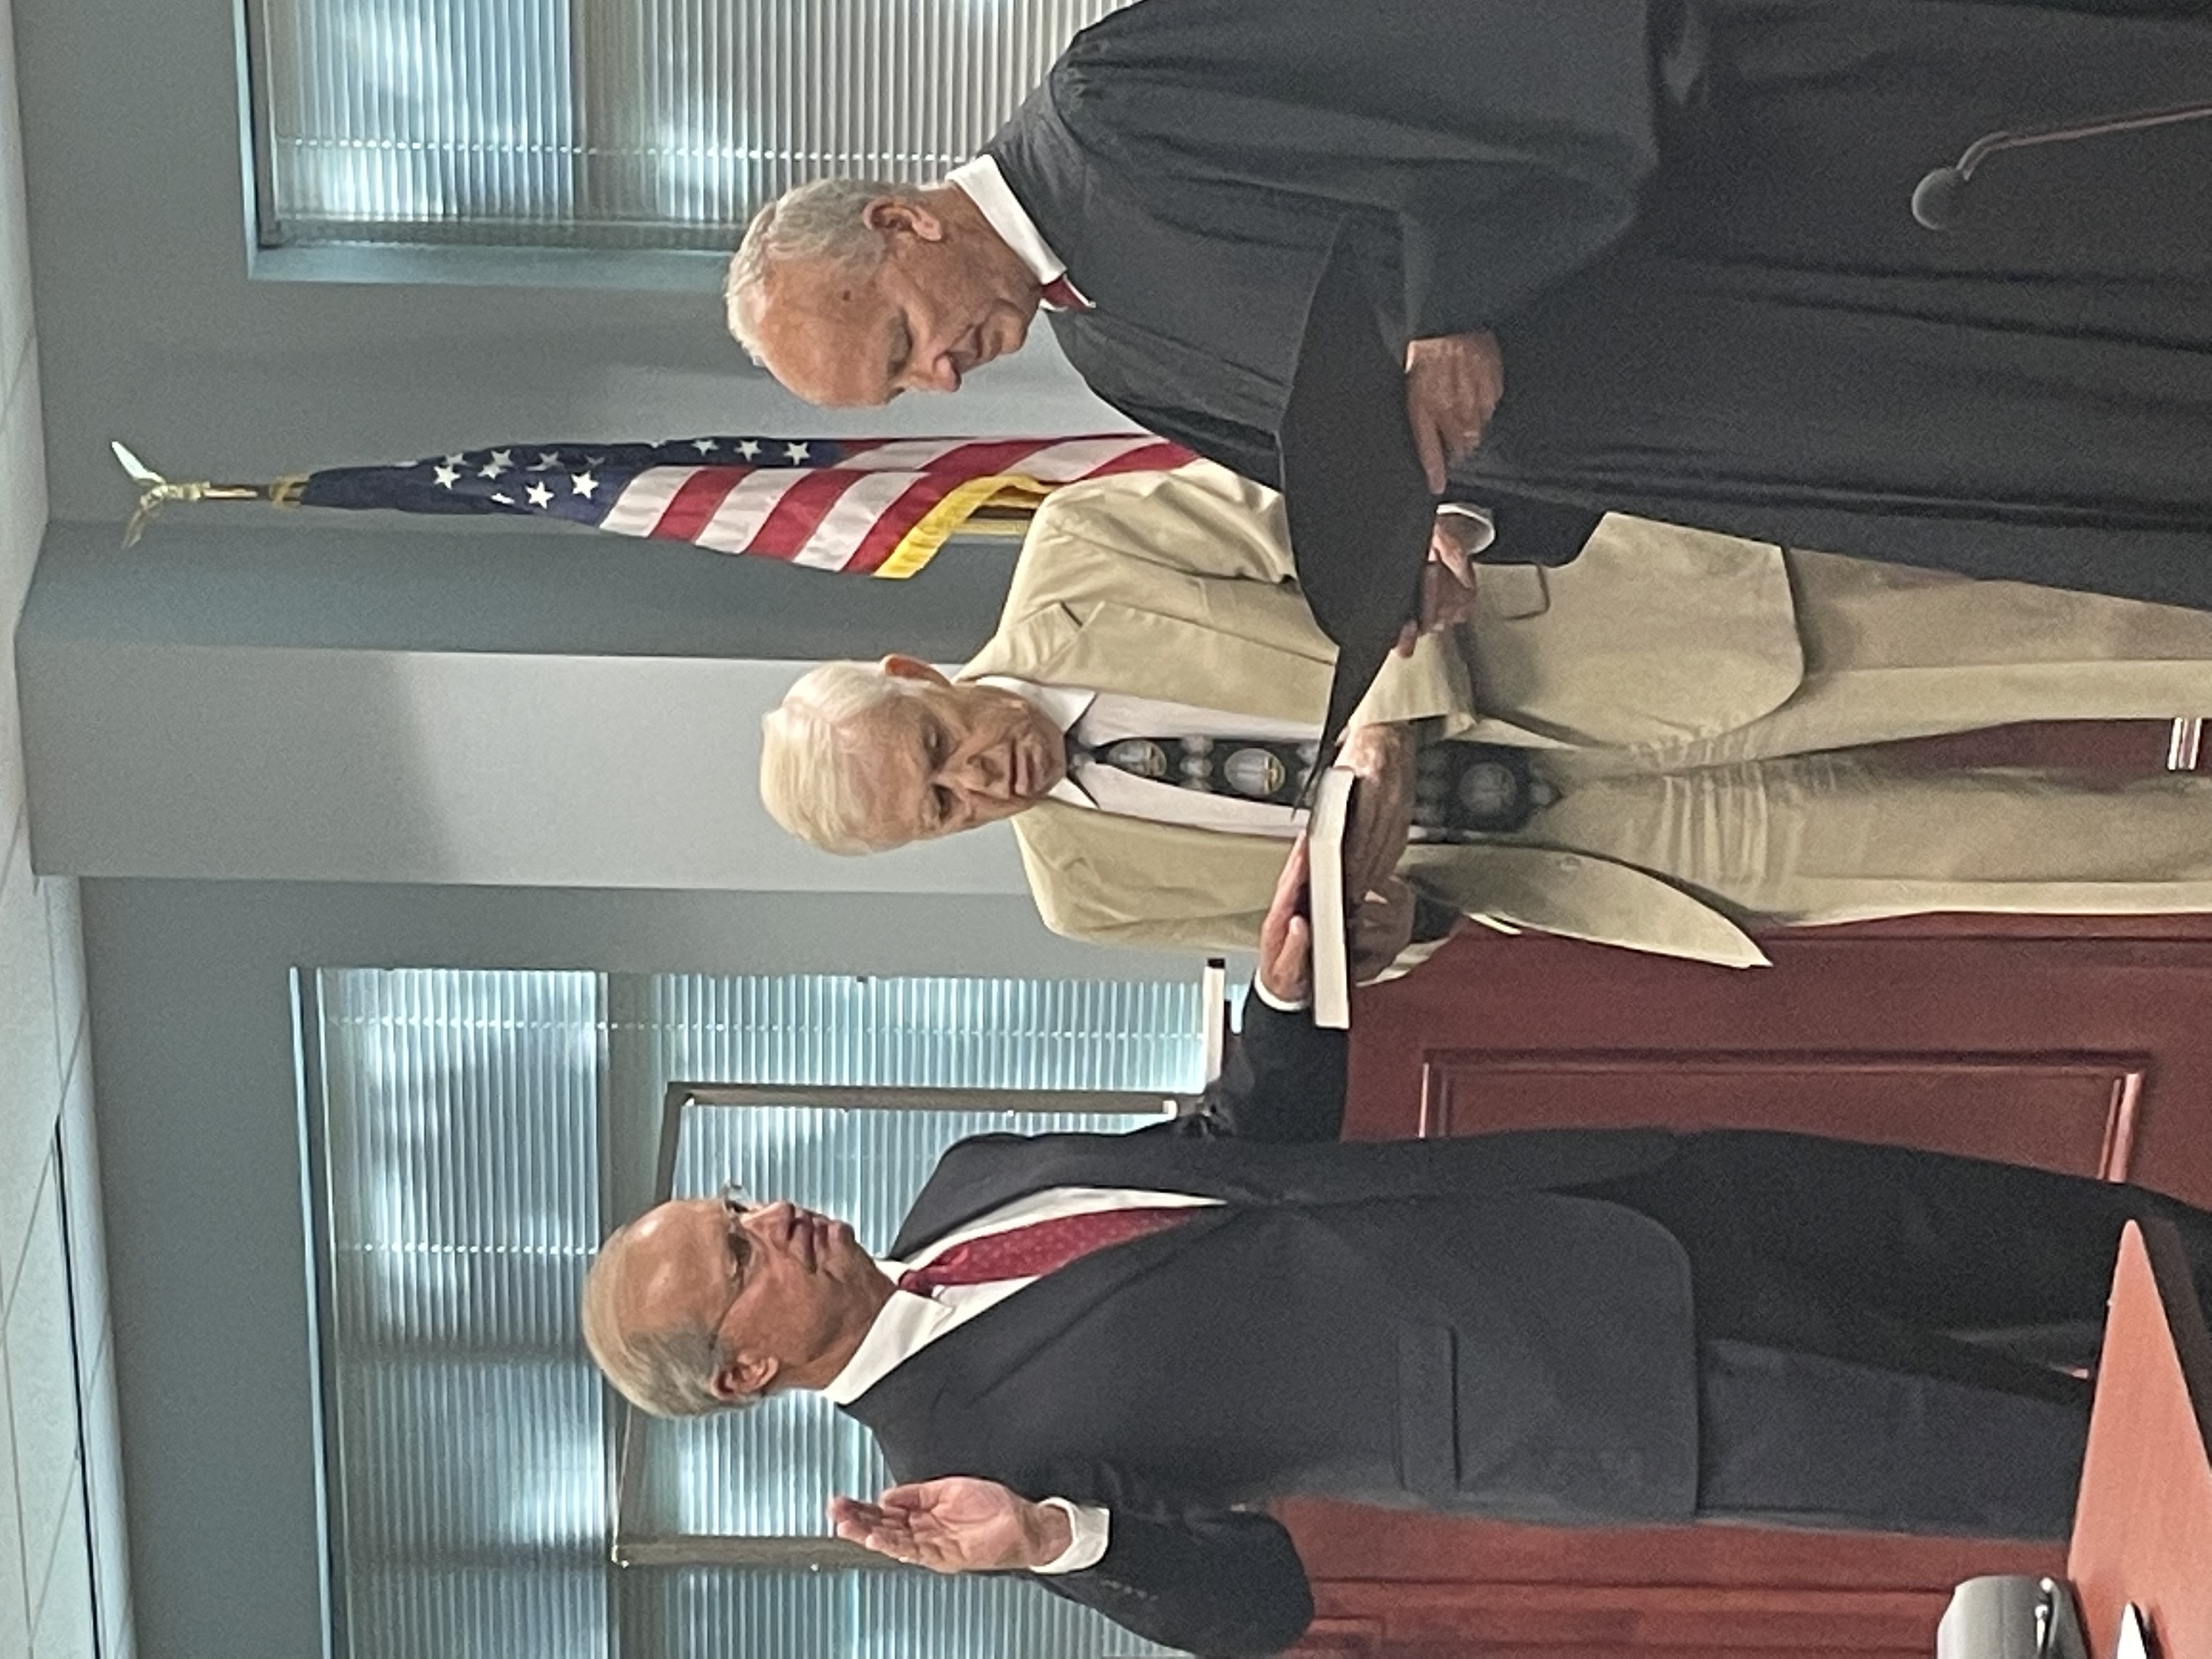 Chief Justice Newby administers the oath of office to Dr. Donald van der Vaart